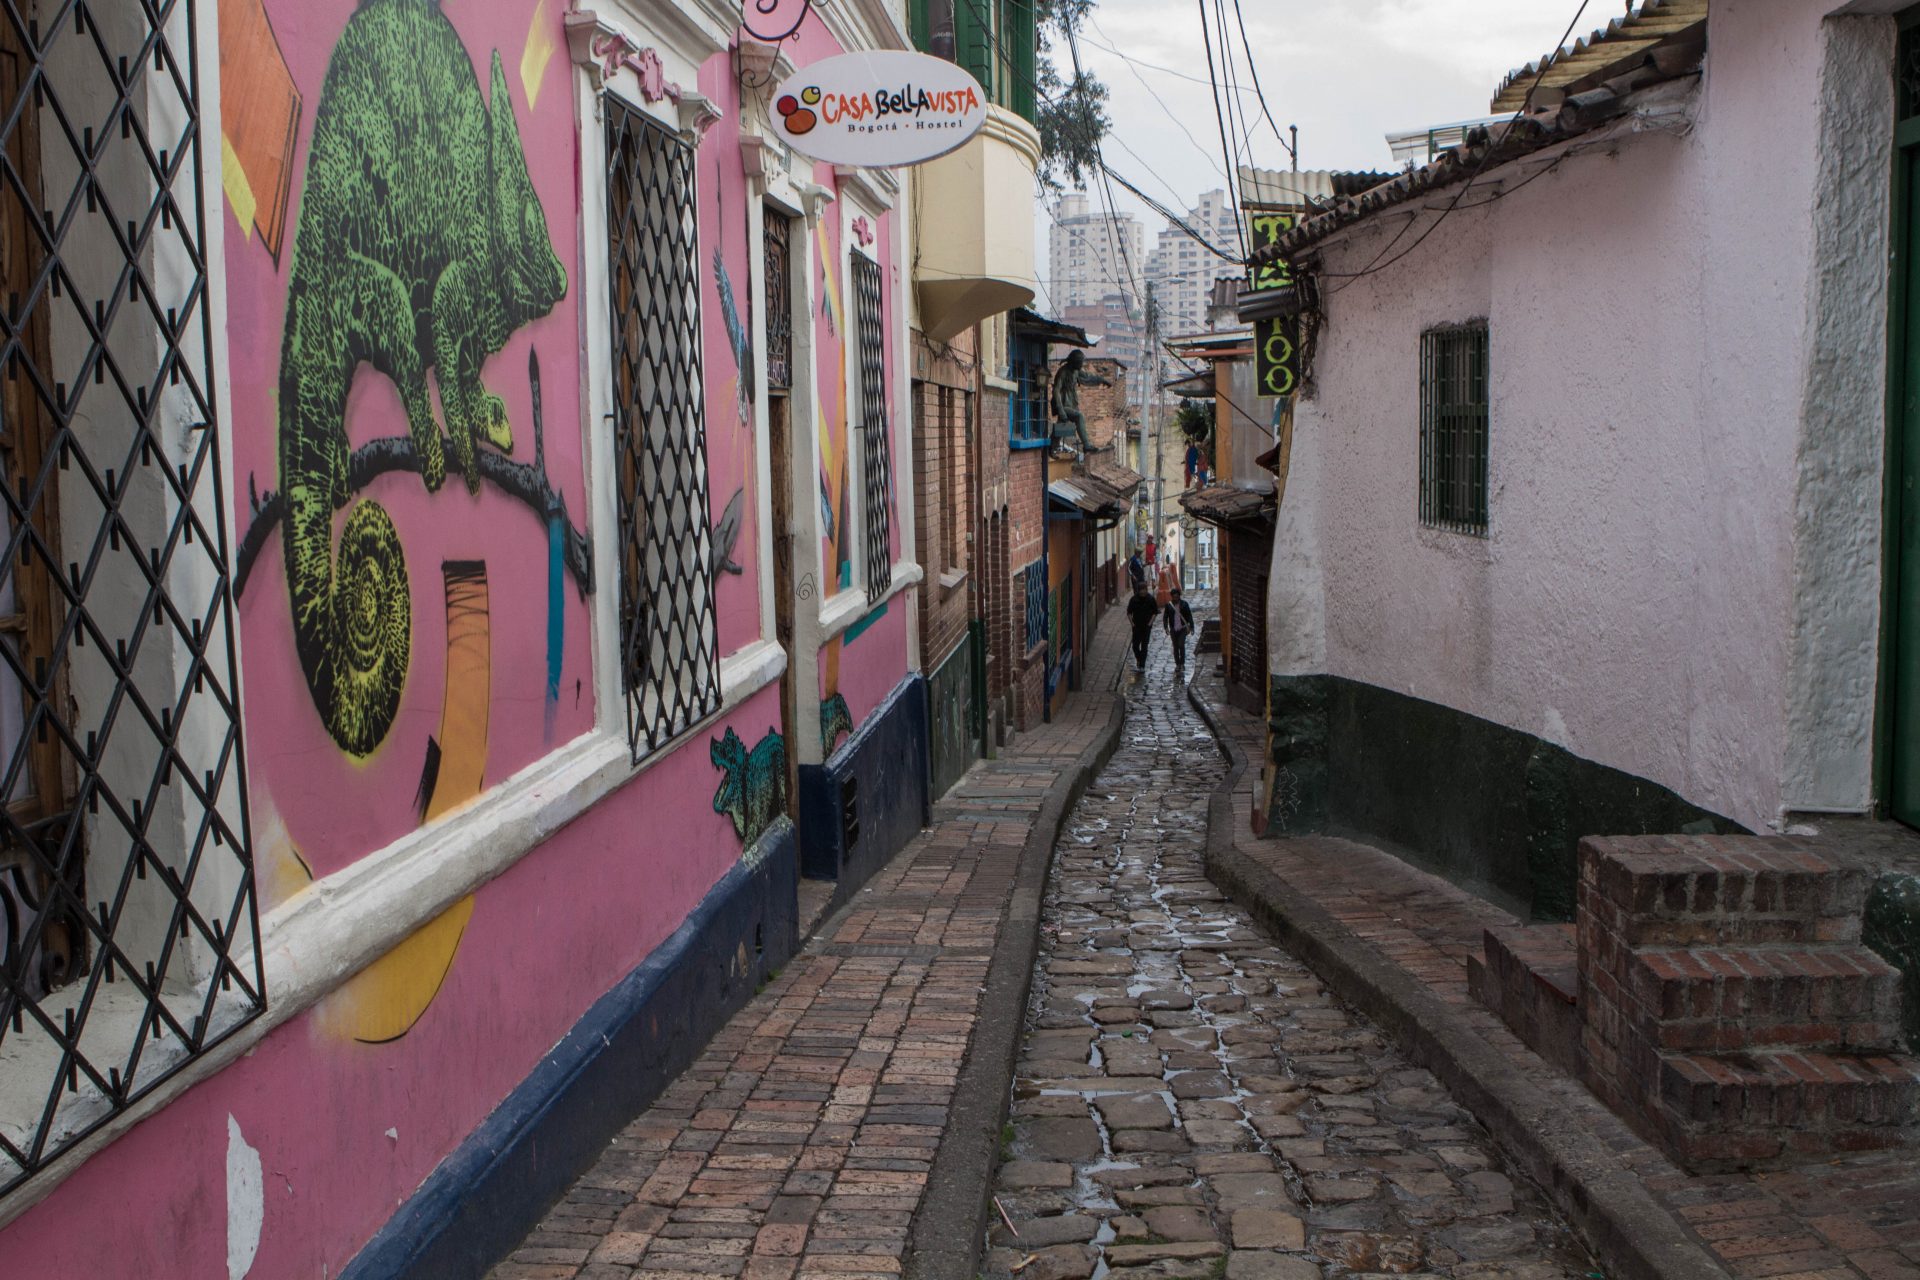 Picture of narrow cobblestone lined street with graffiti art lining one side of the street in La Candelaria.